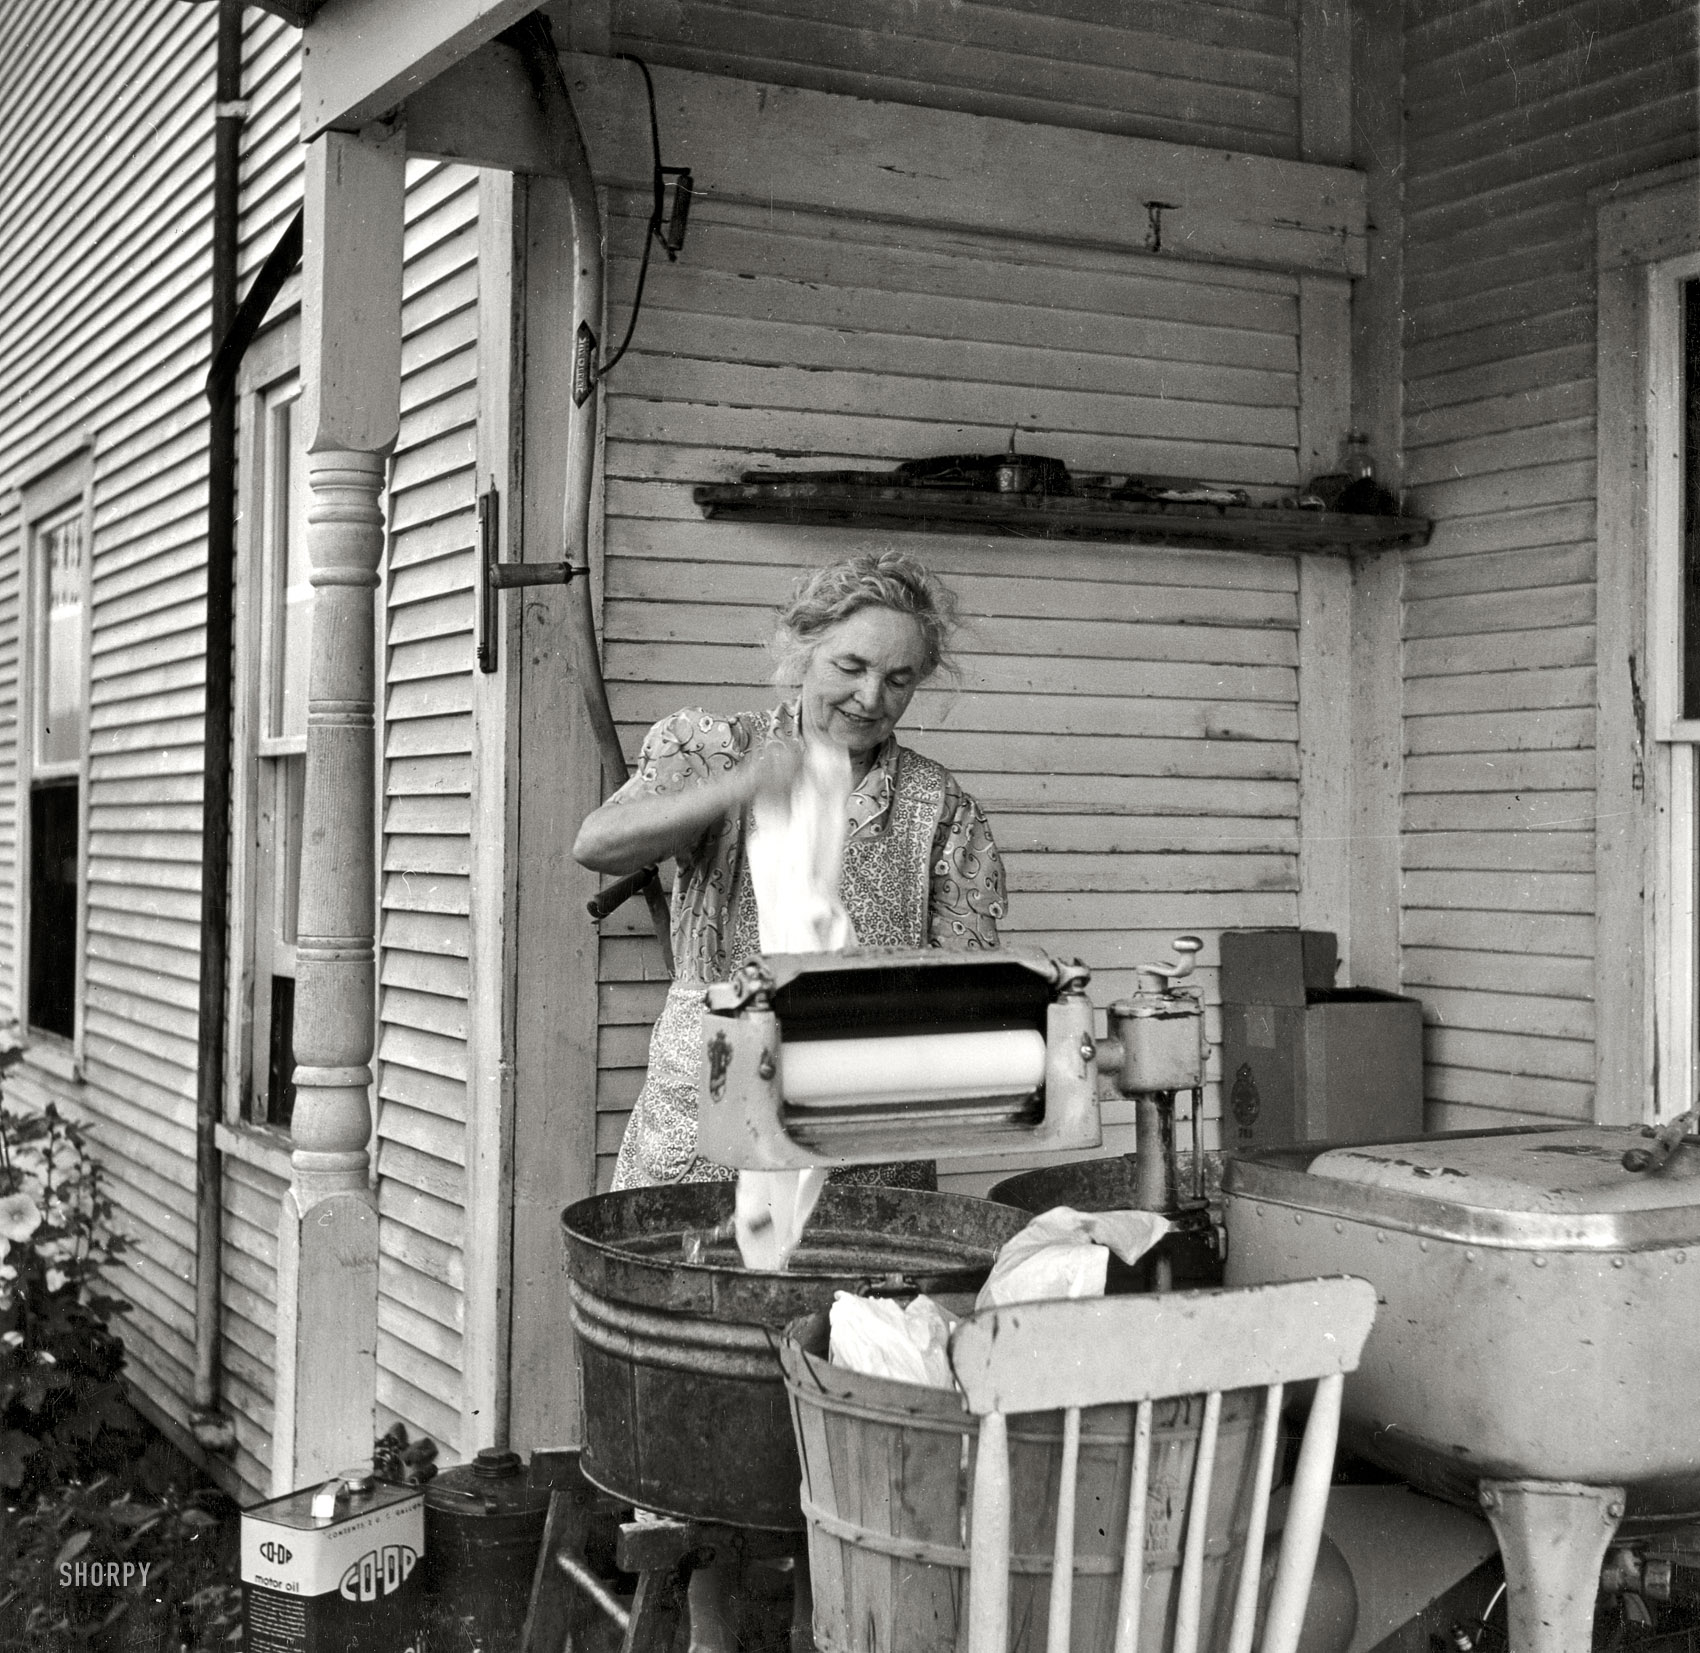 July 1940. "Farm woman washing clothes in her motor-driven washing machine. Near Lincoln, Vermont." Sliver gelatin print by Louise Rosskam. View full size.